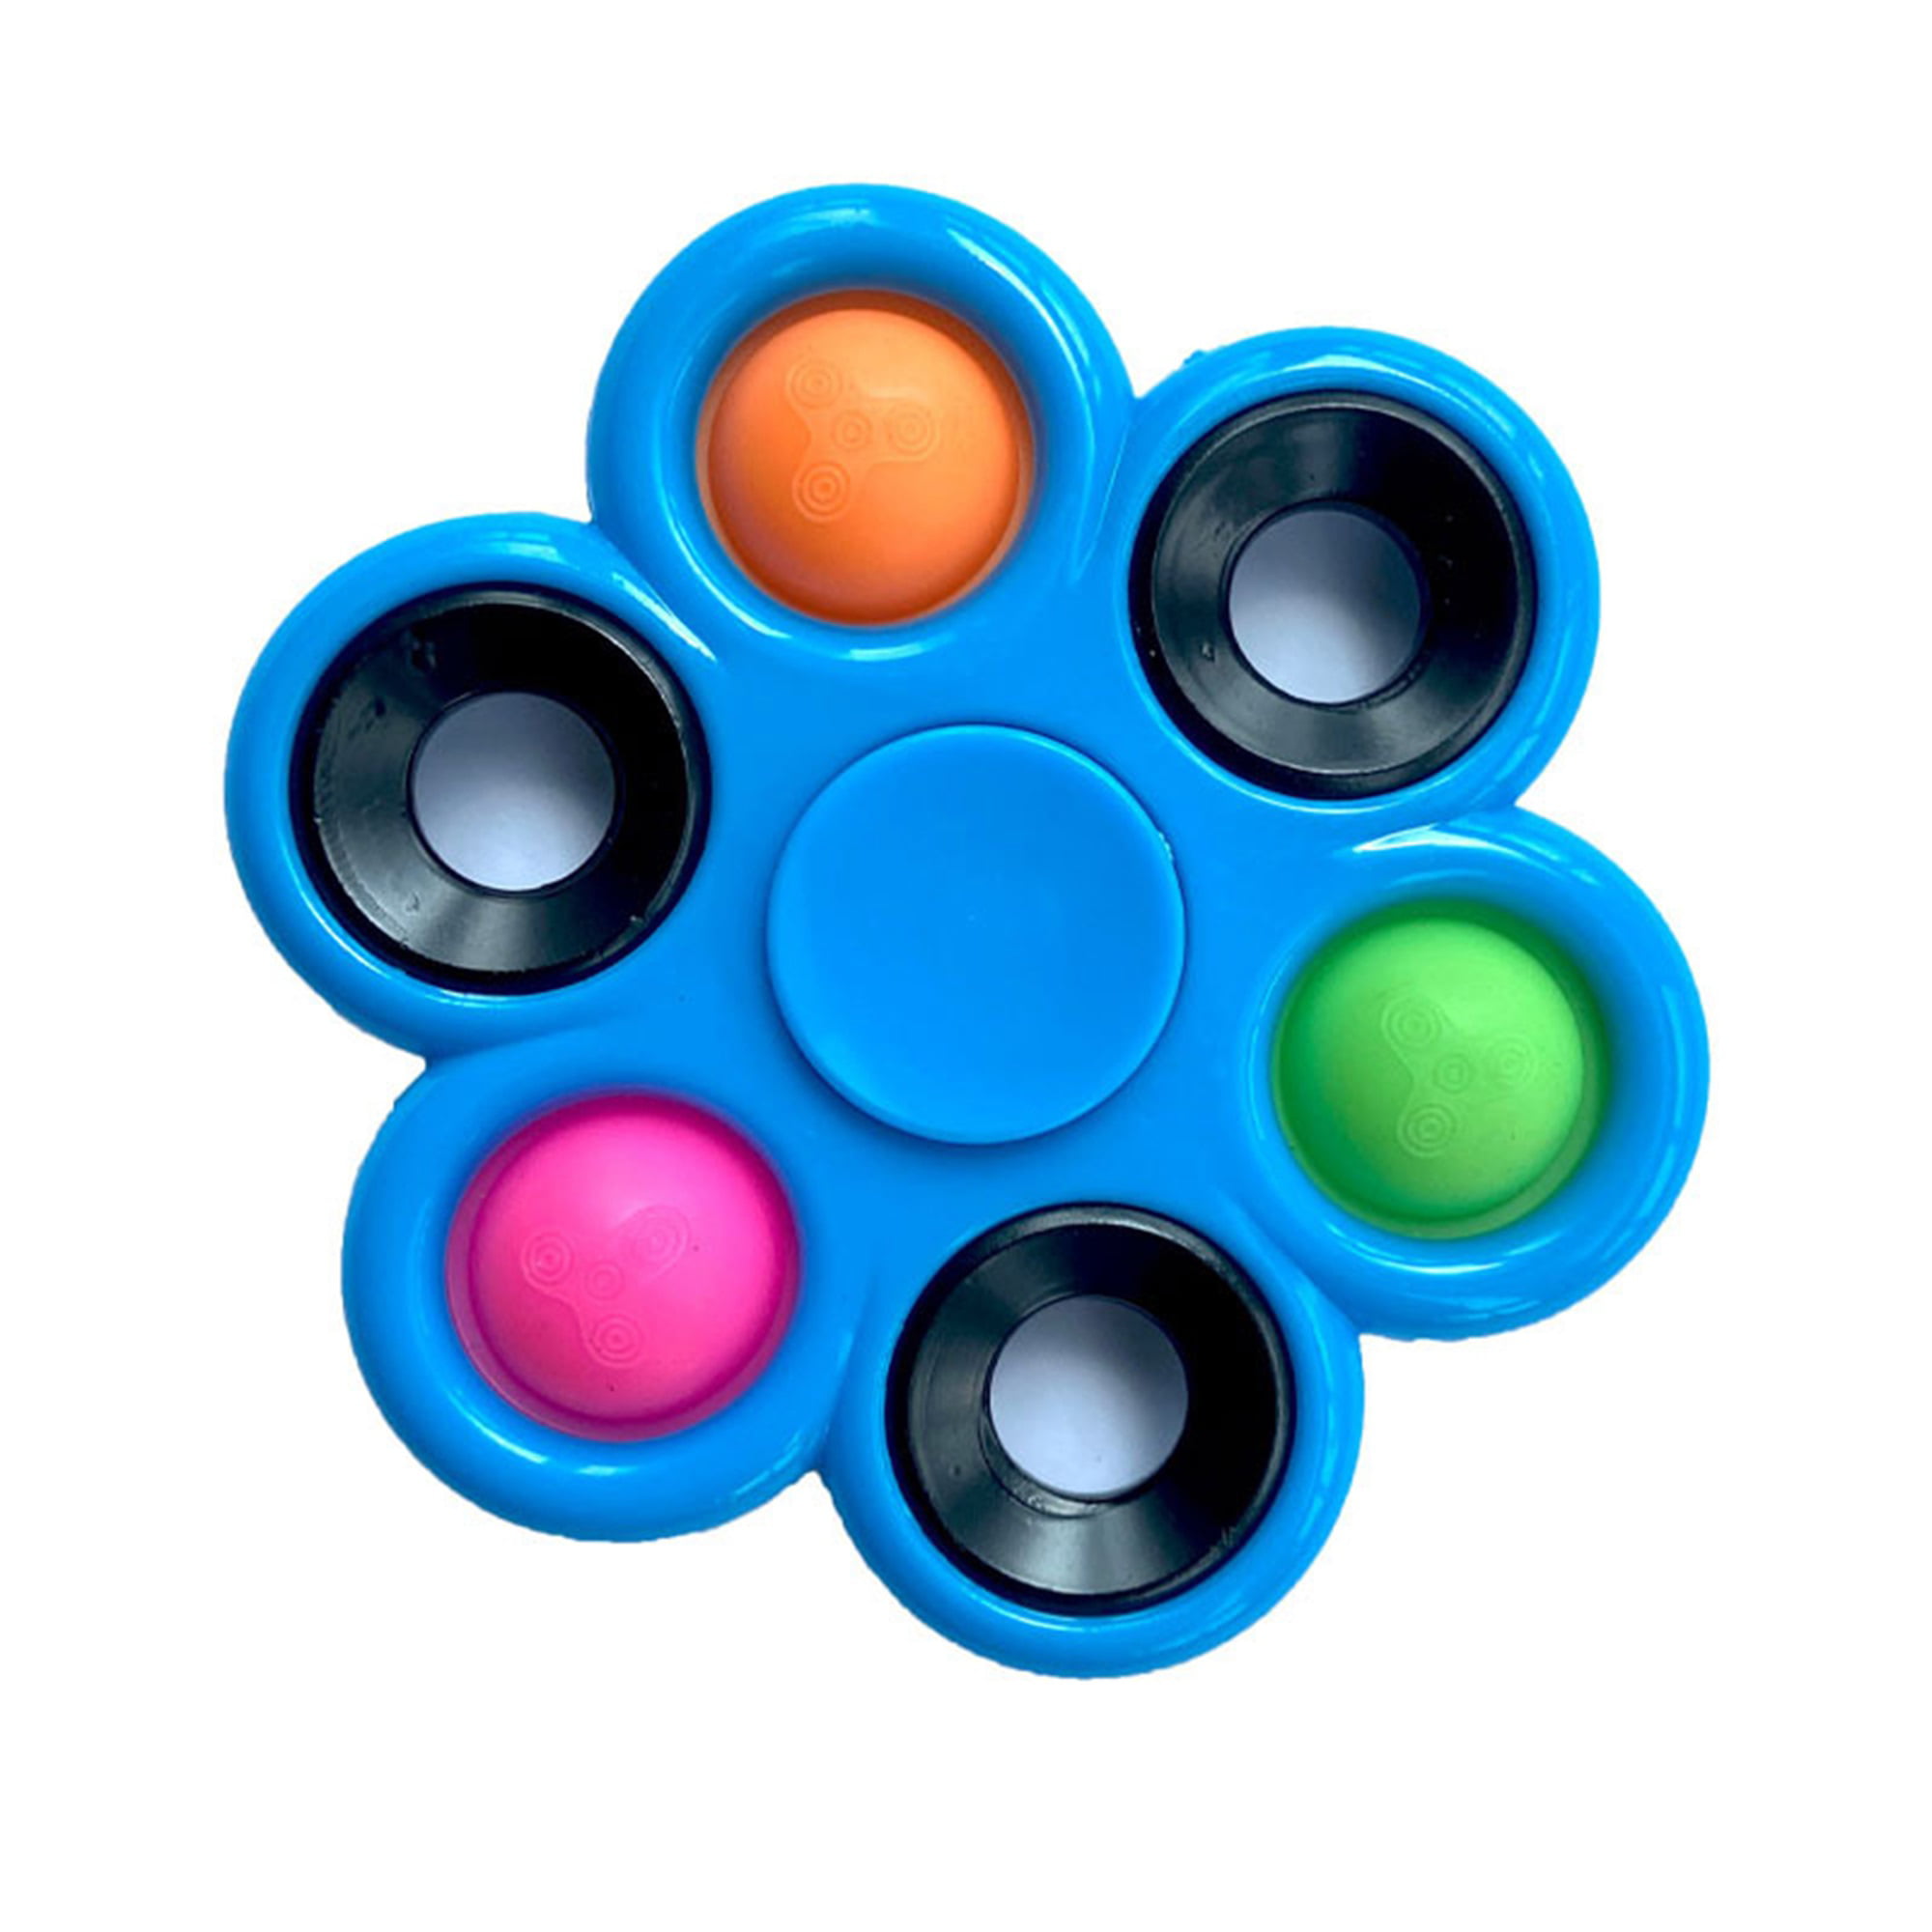 Hand Spinner Glow In The Dark Fidget Spinners Retail Counter Display Box of 24 